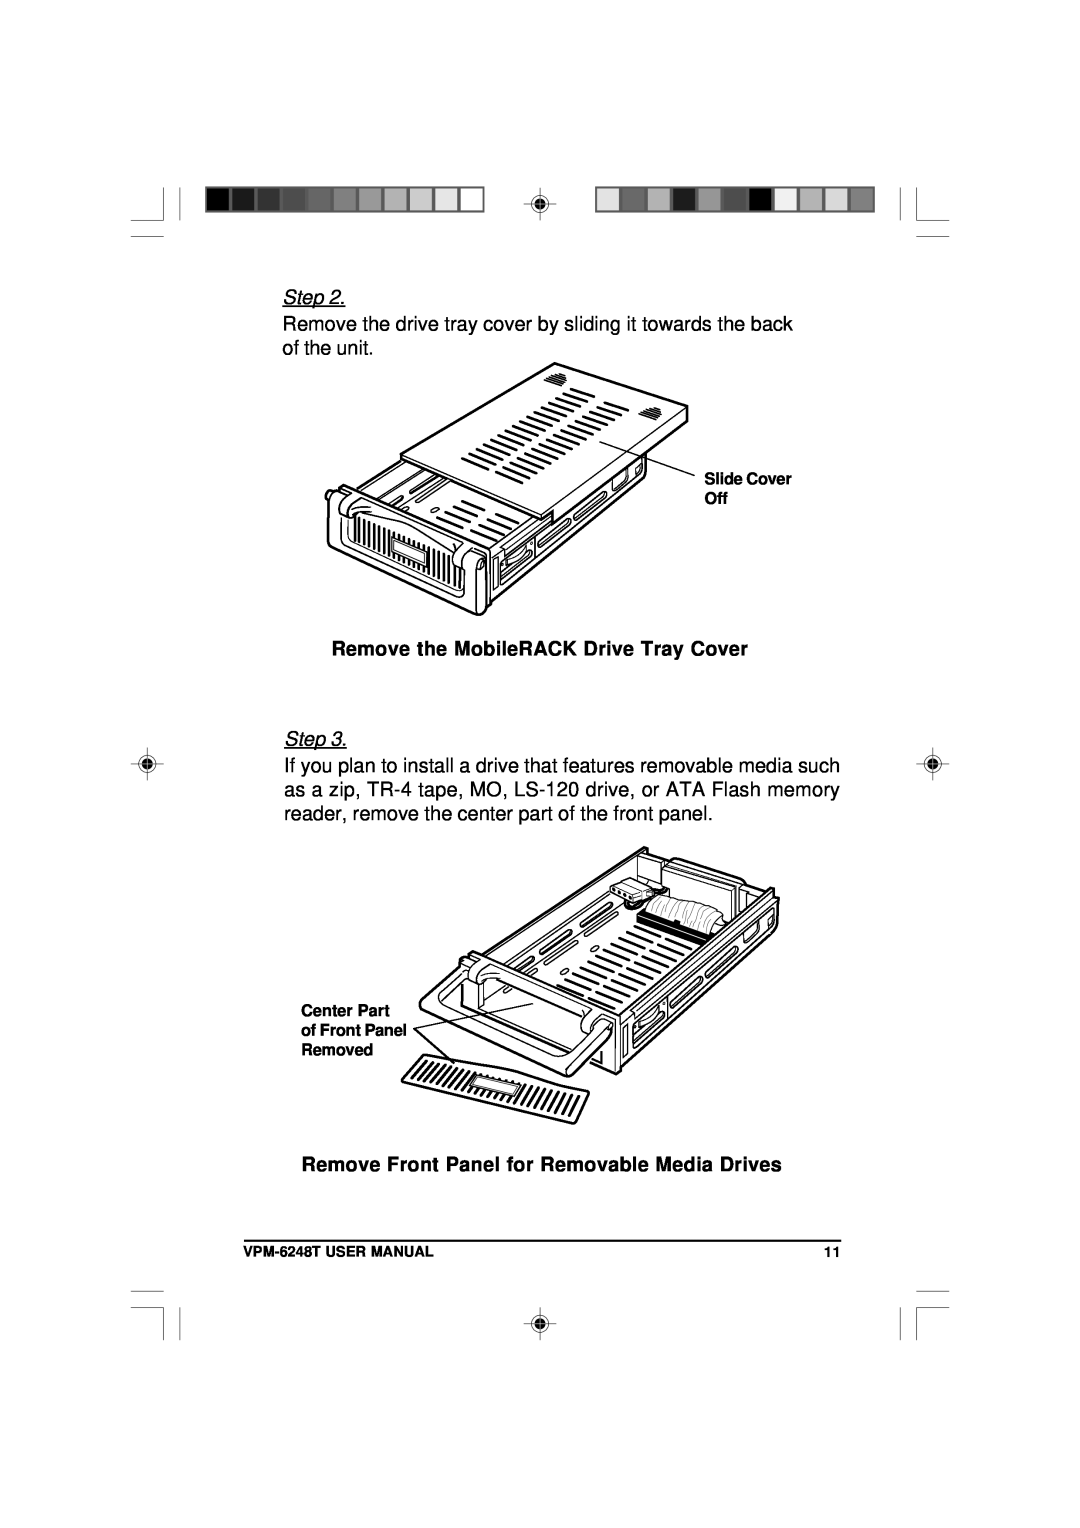 VIPowER VPM-6248T user manual Remove the MobileRACK Drive Tray Cover, Remove Front Panel for Removable Media Drives, Step 